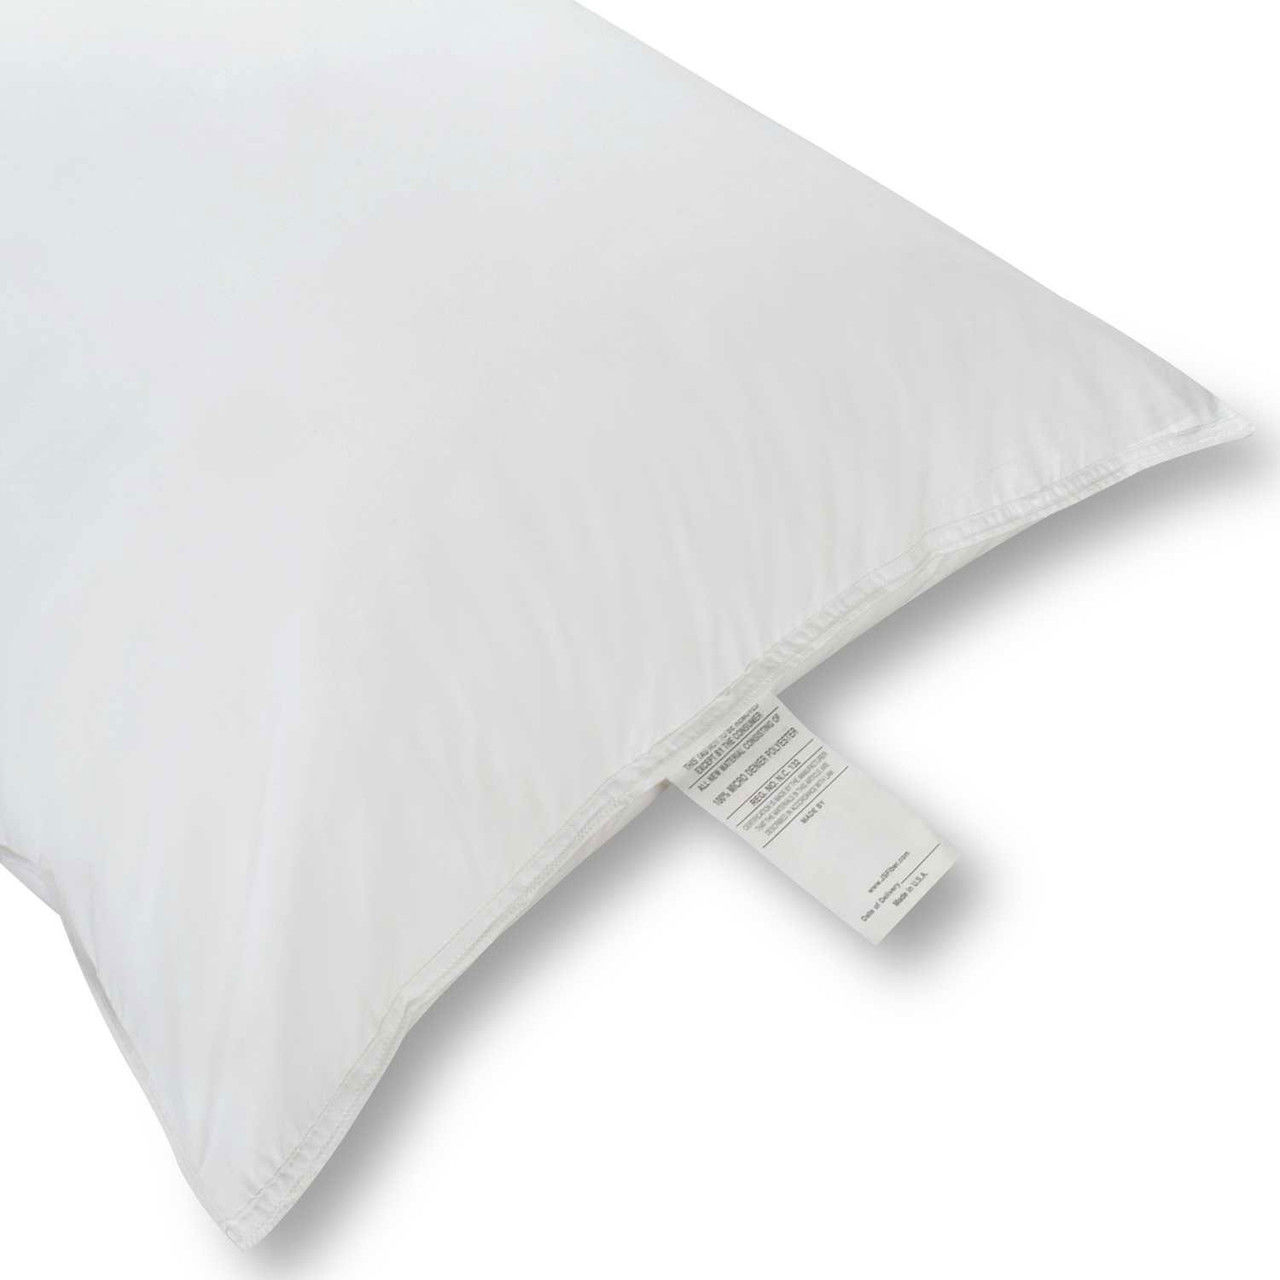 Are the Size dimensions correct? The King Size appears to be the same dimensions as a standard pillow.